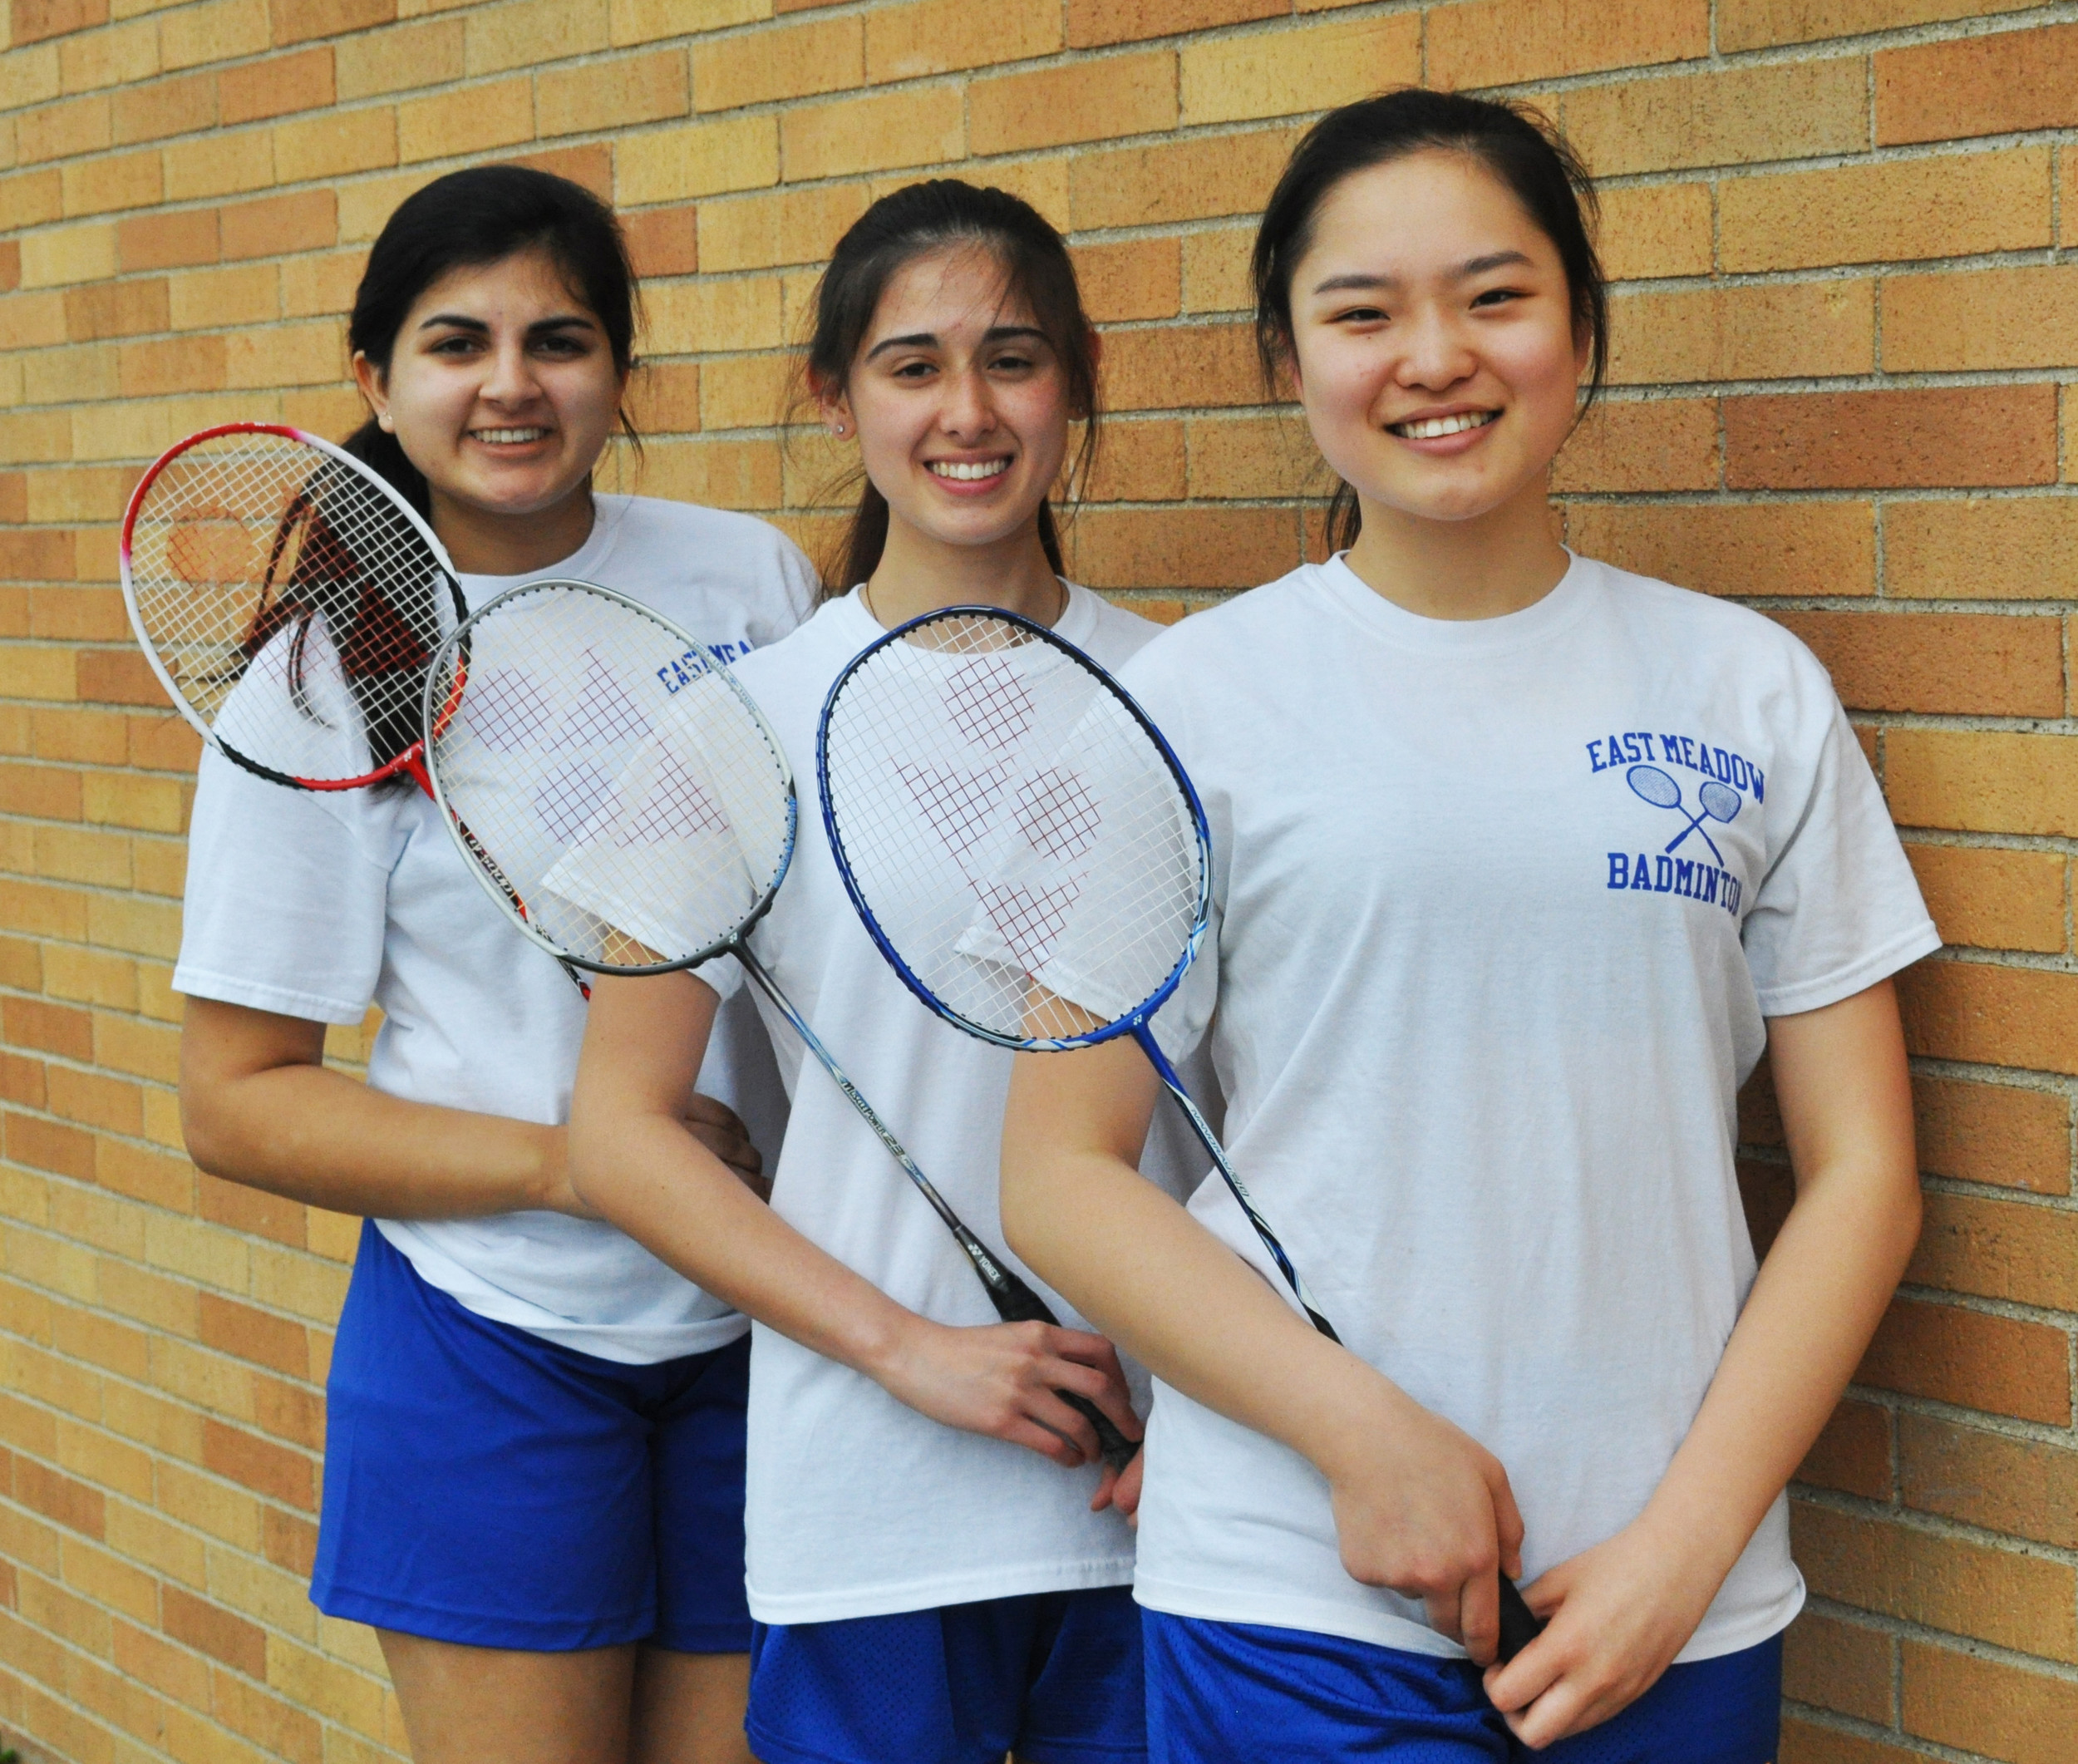 Lady Jets' standout singles players, from left, Nikita Khosla, Alicia Gonzalez and Lily Lin led East Meadow to repeat as conference champion.